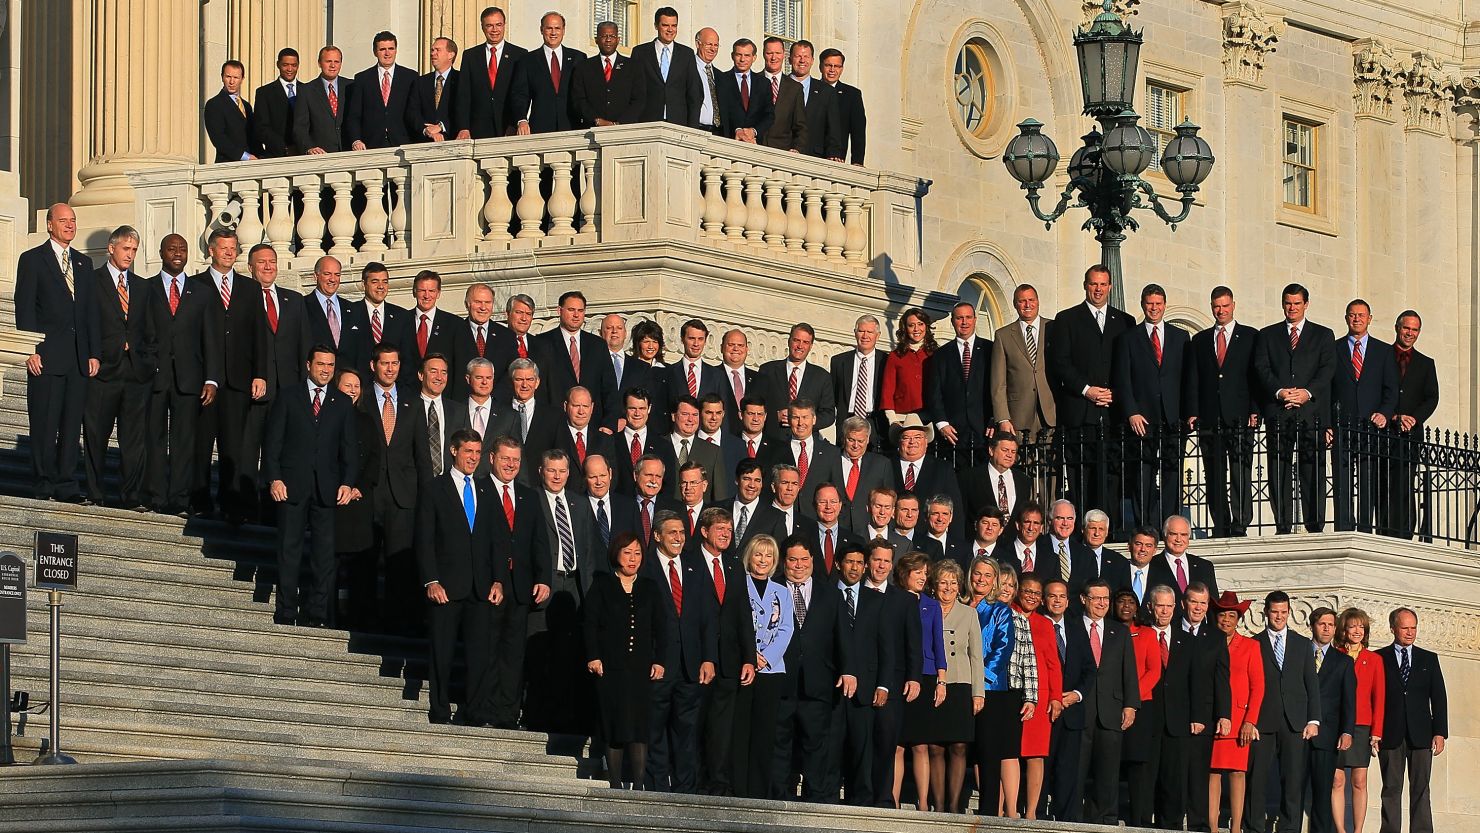  Newly elected freshman members of the 112th Congress pose for a photo on the steps of the U.S. Capitol in November 2010.